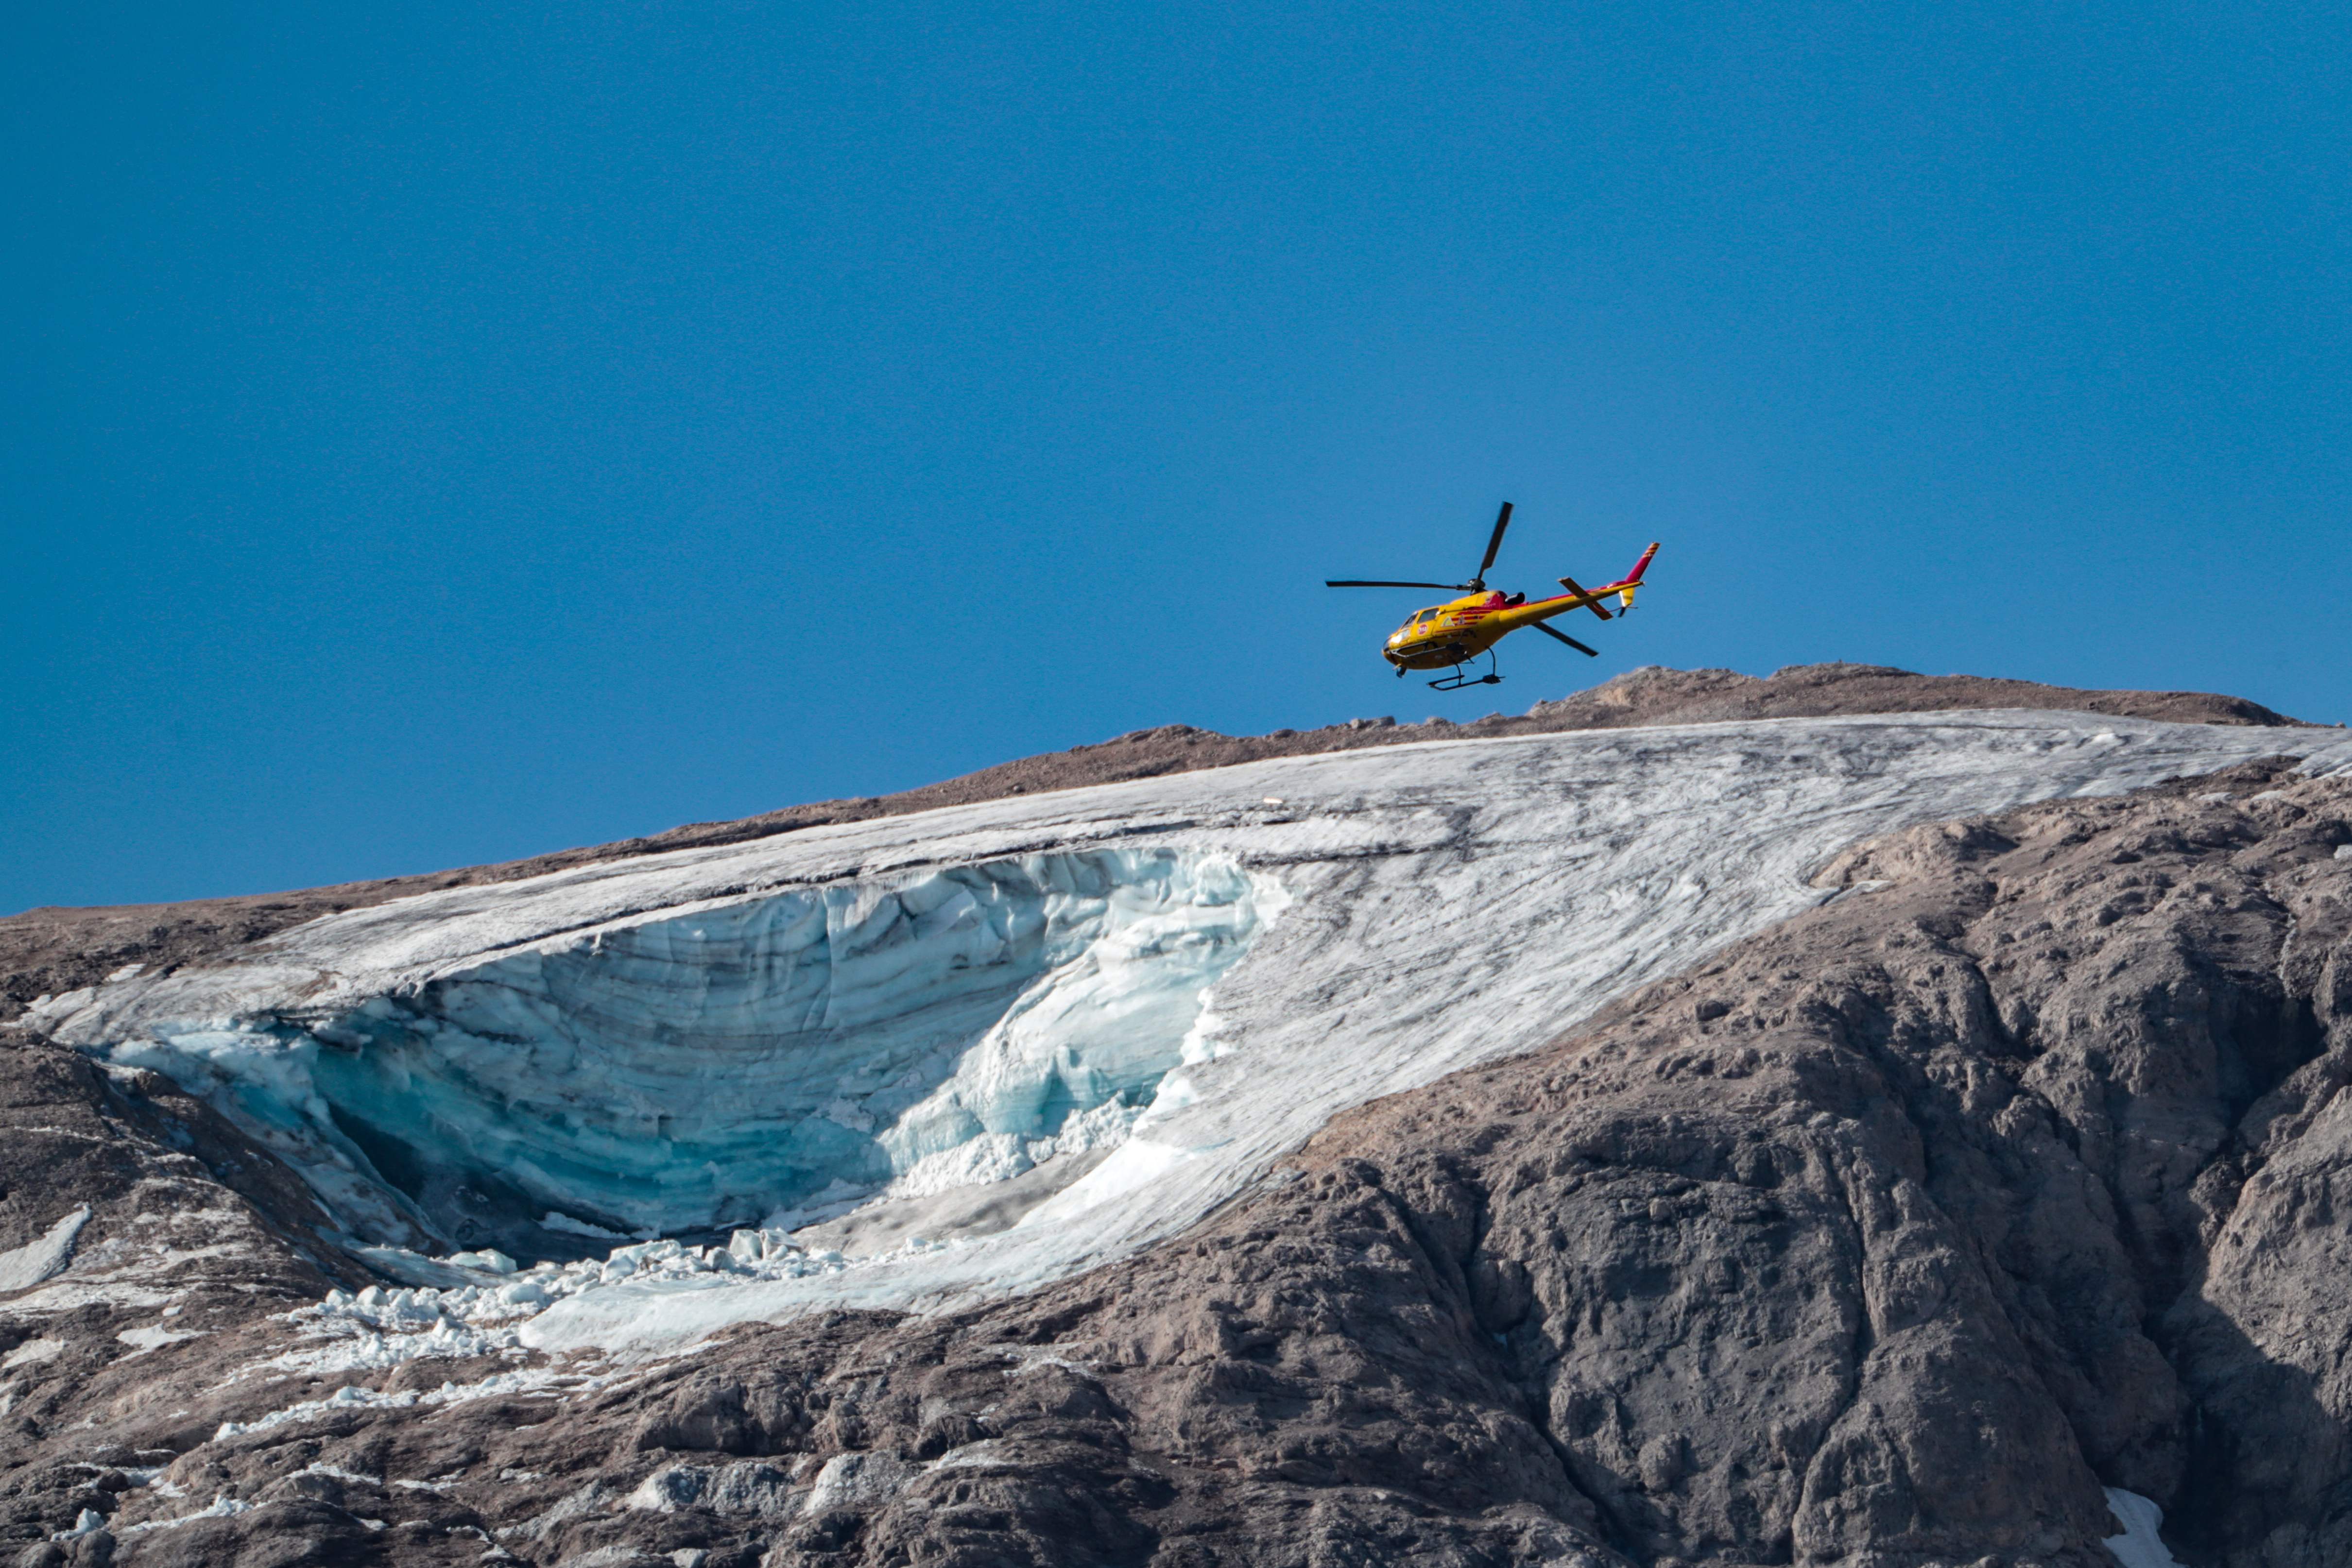 A rescue helicopter flies on July 4, 2022 over the glacier that collapsed the day before on the mountain of Marmolada, the highest in the Dolomites